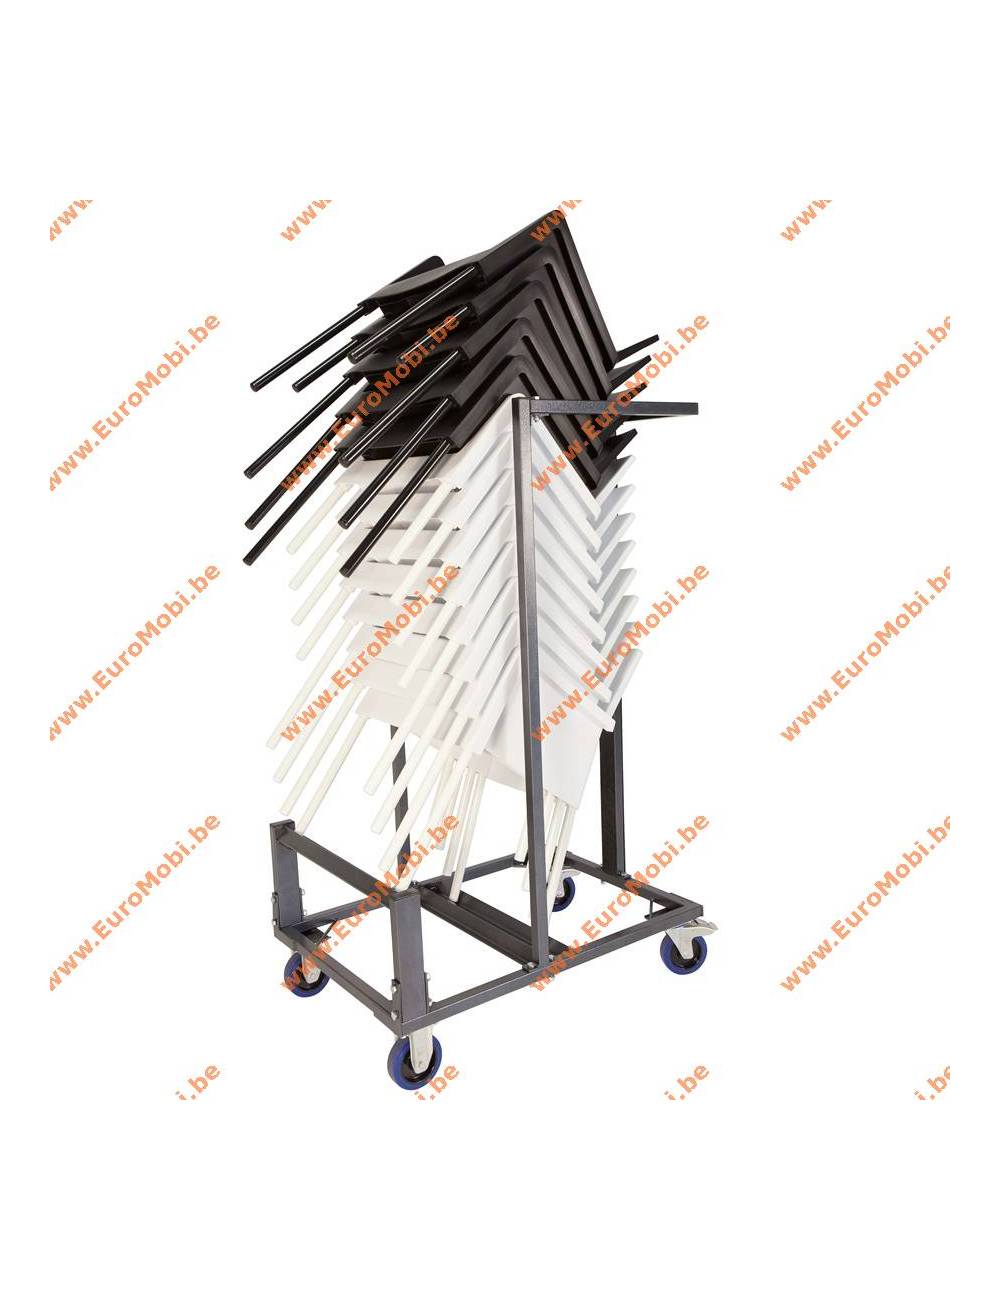 Small transport trolley stacking chairs Callac and Doha